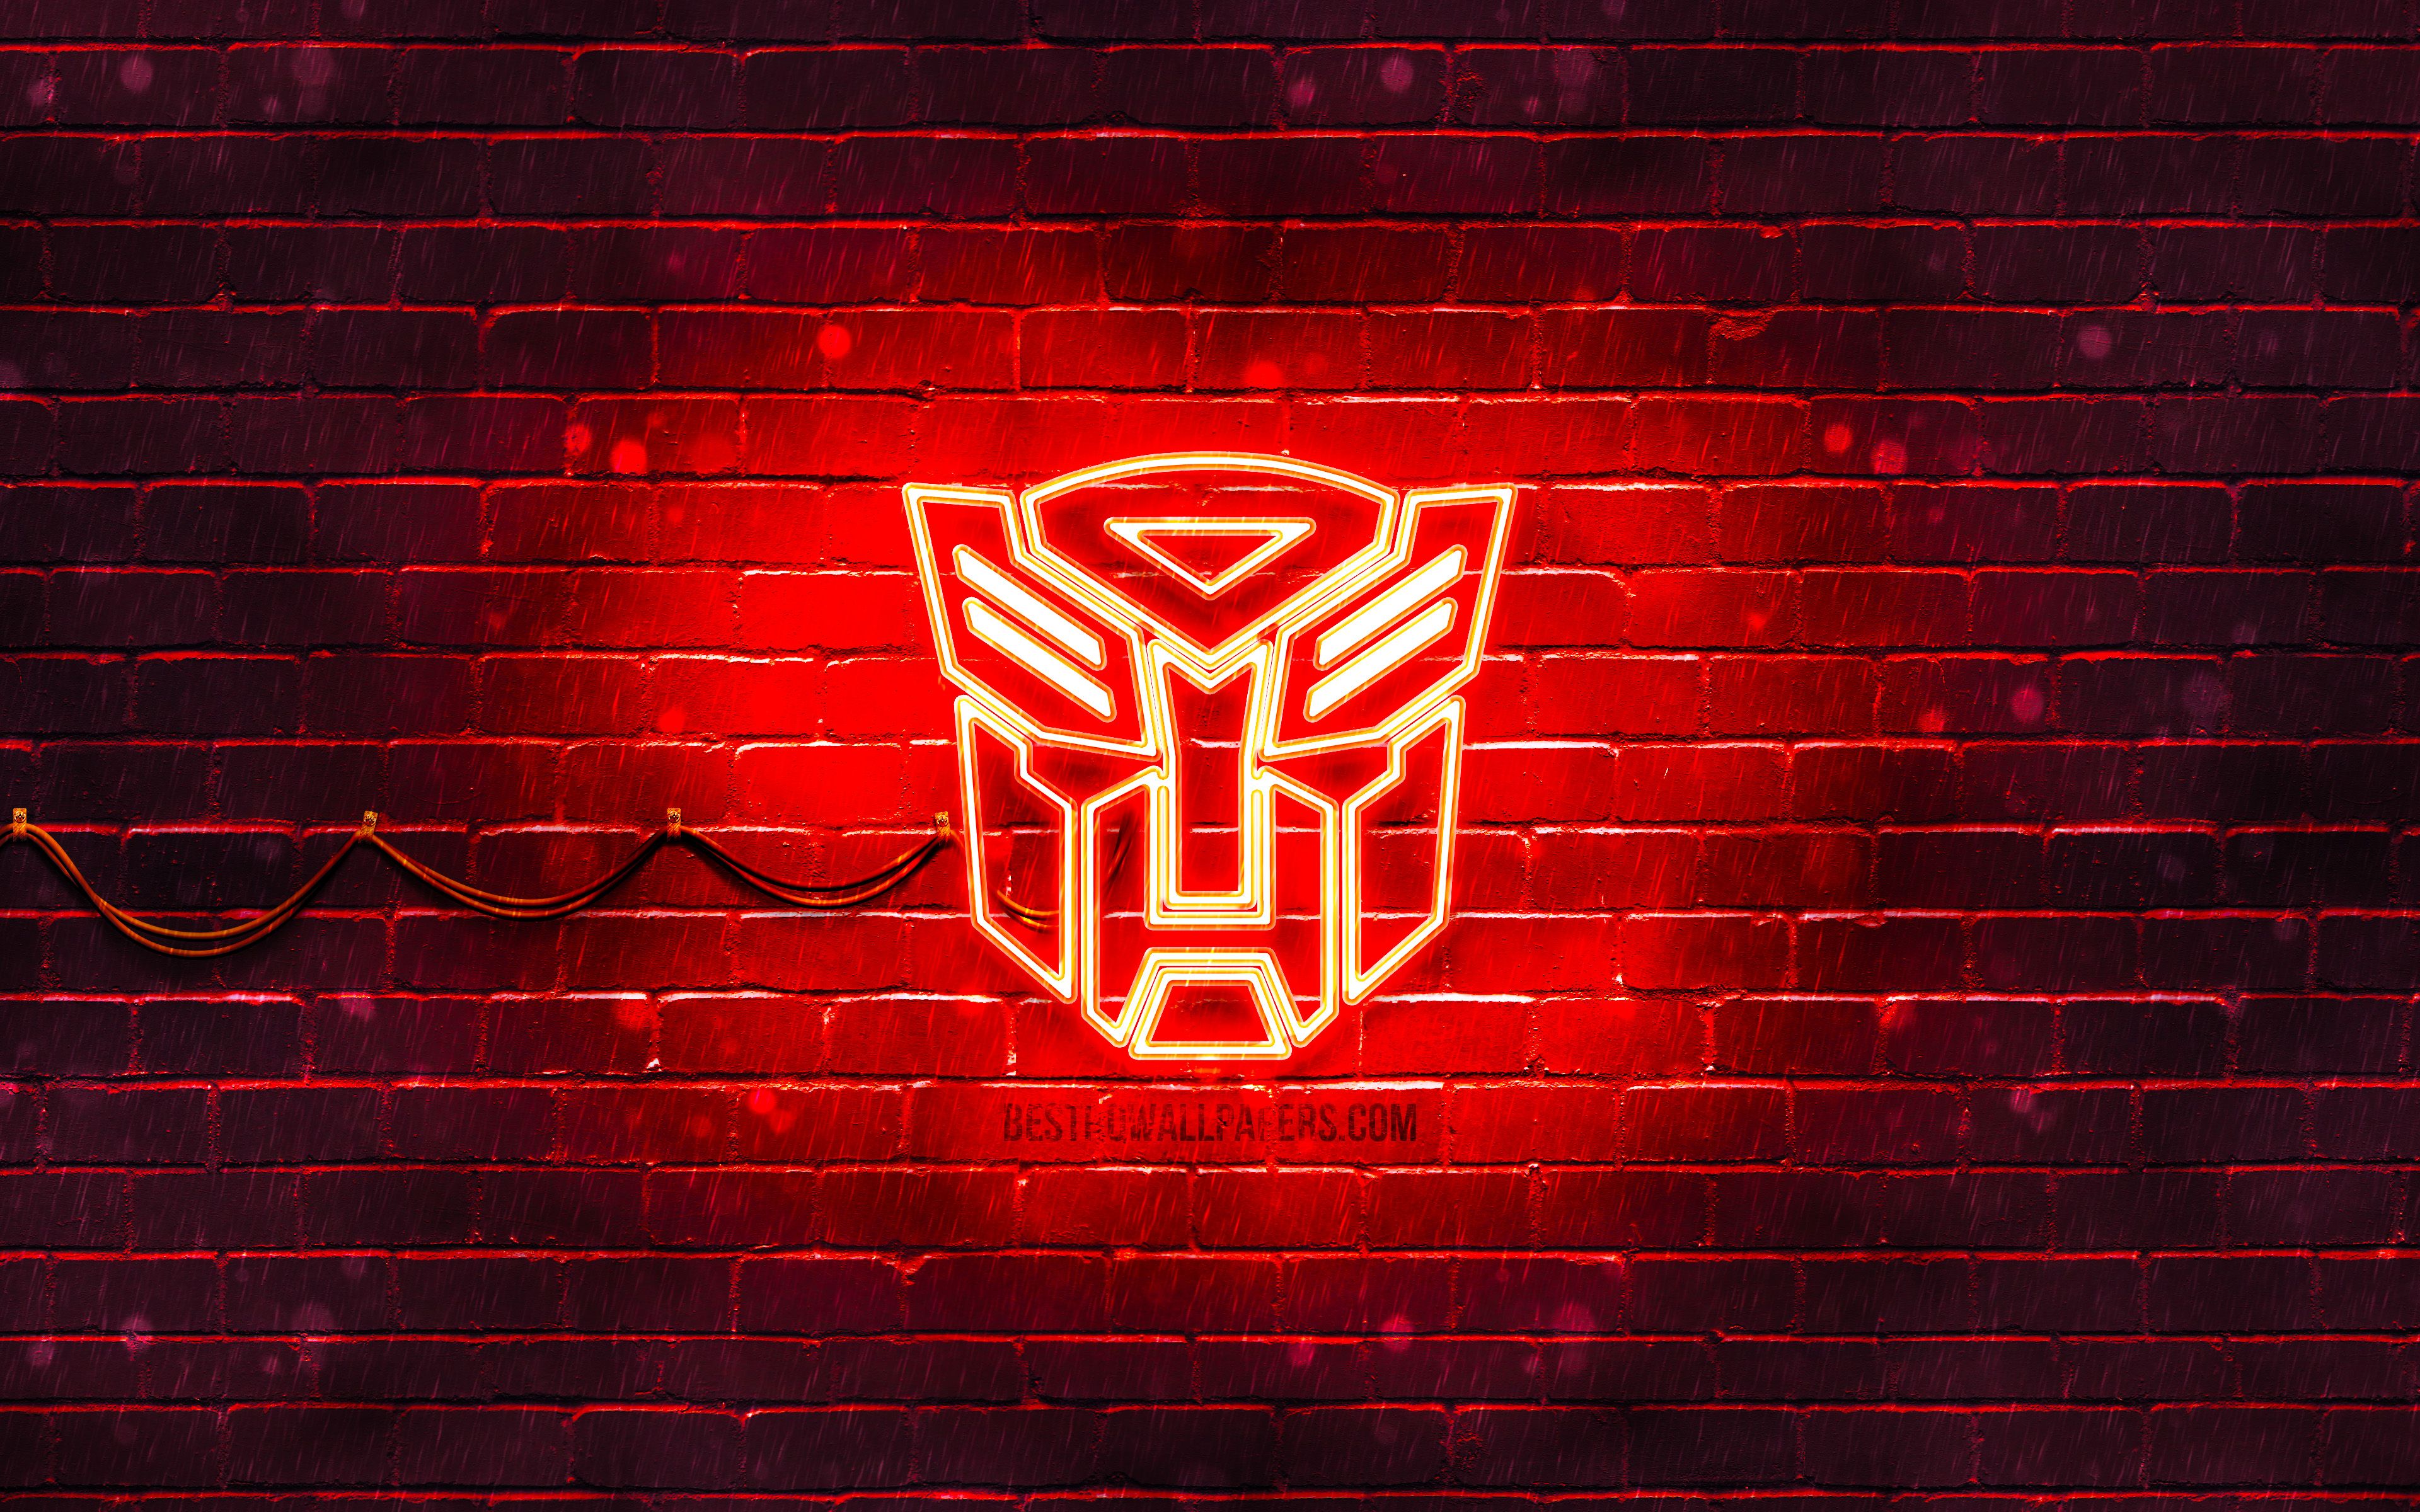 Download wallpaper Transformers red logo, 4k, red brickwall, Transformers logo, movies, Transformers neon logo, Transformers for desktop with resolution 3840x2400. High Quality HD picture wallpaper